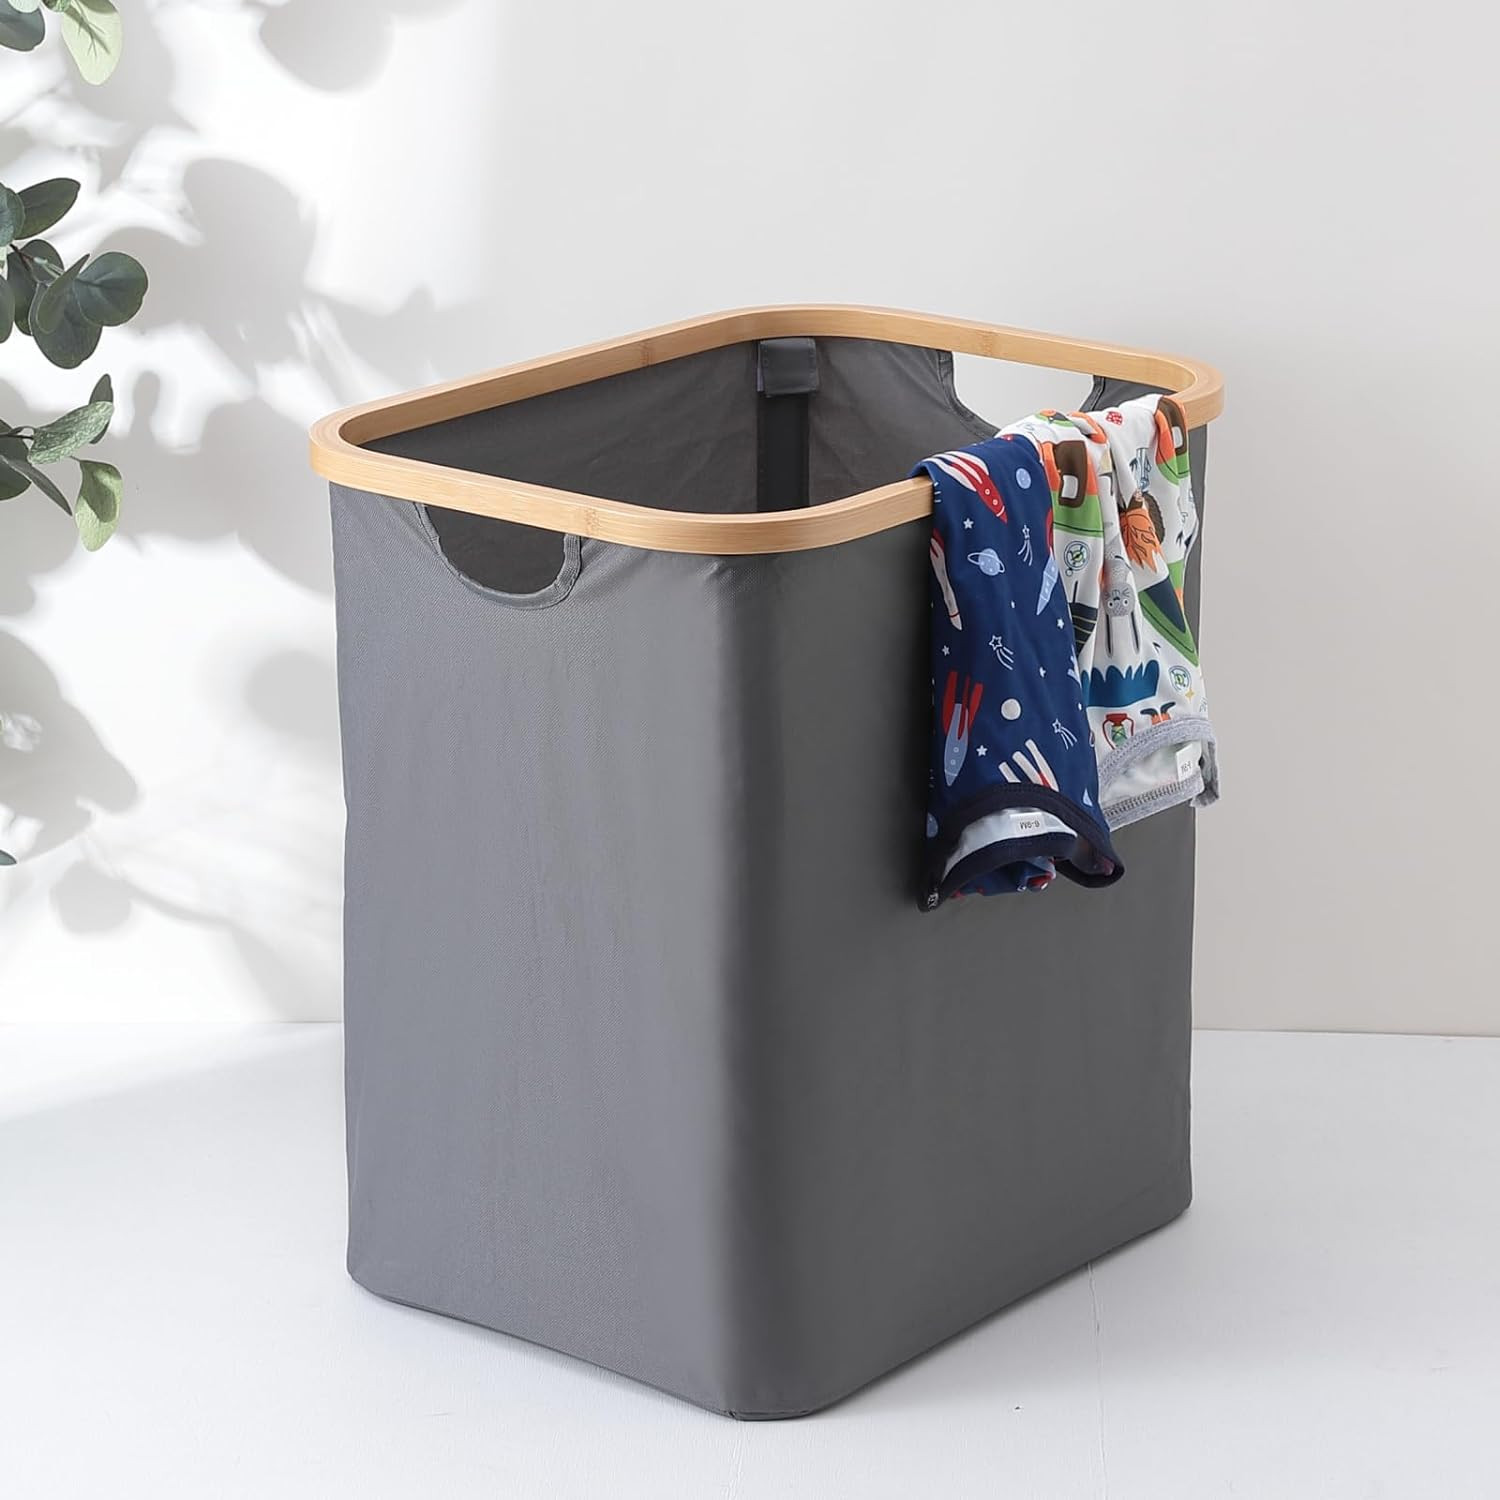 Kuber Industries Laundry Basket For Clothes|Foldable Laundry Hamper|Basket For Toys, Dirty clothes, Storage 